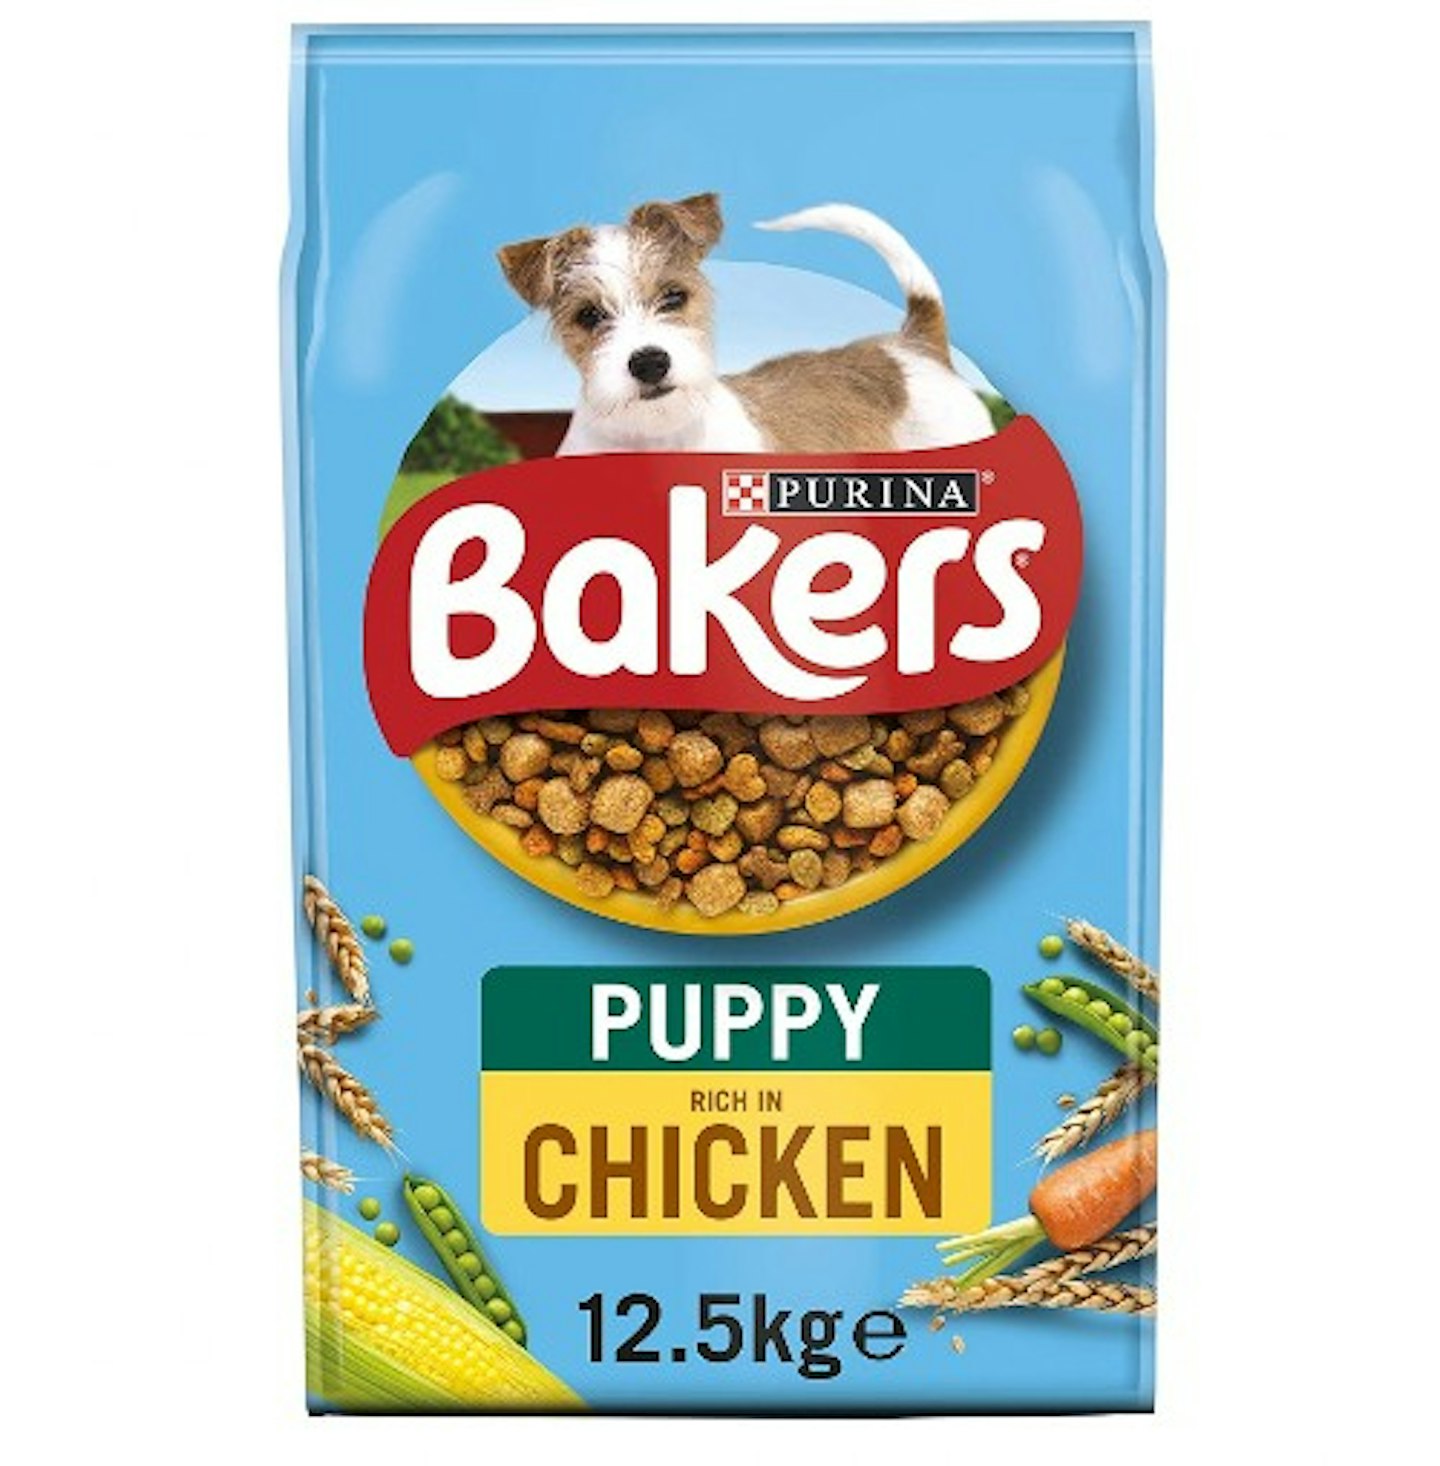 Bakers Puppy Dry Dog Food Chicken and Veg 12.5kg